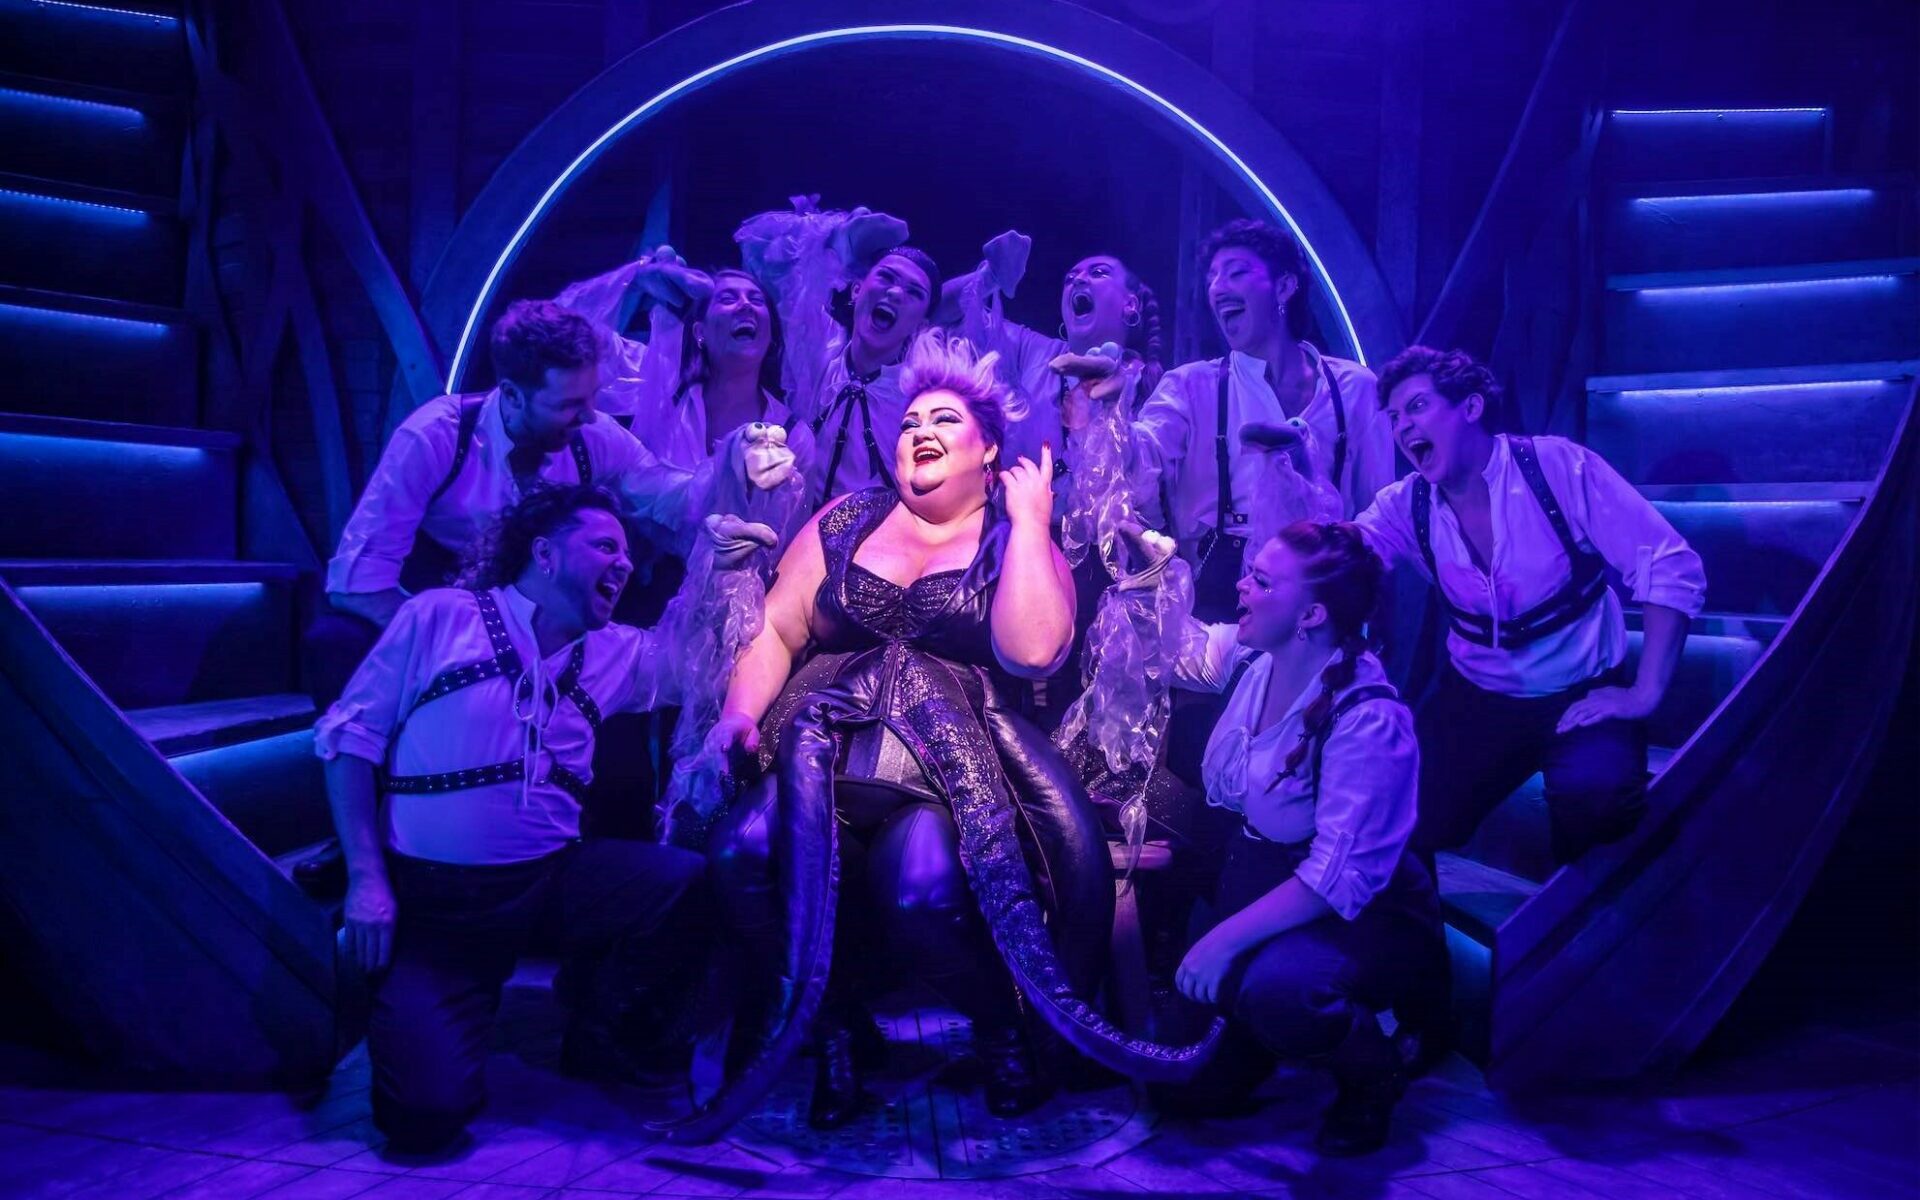 Unfortunate: The Untold Story of Ursula the Sea Witch performance